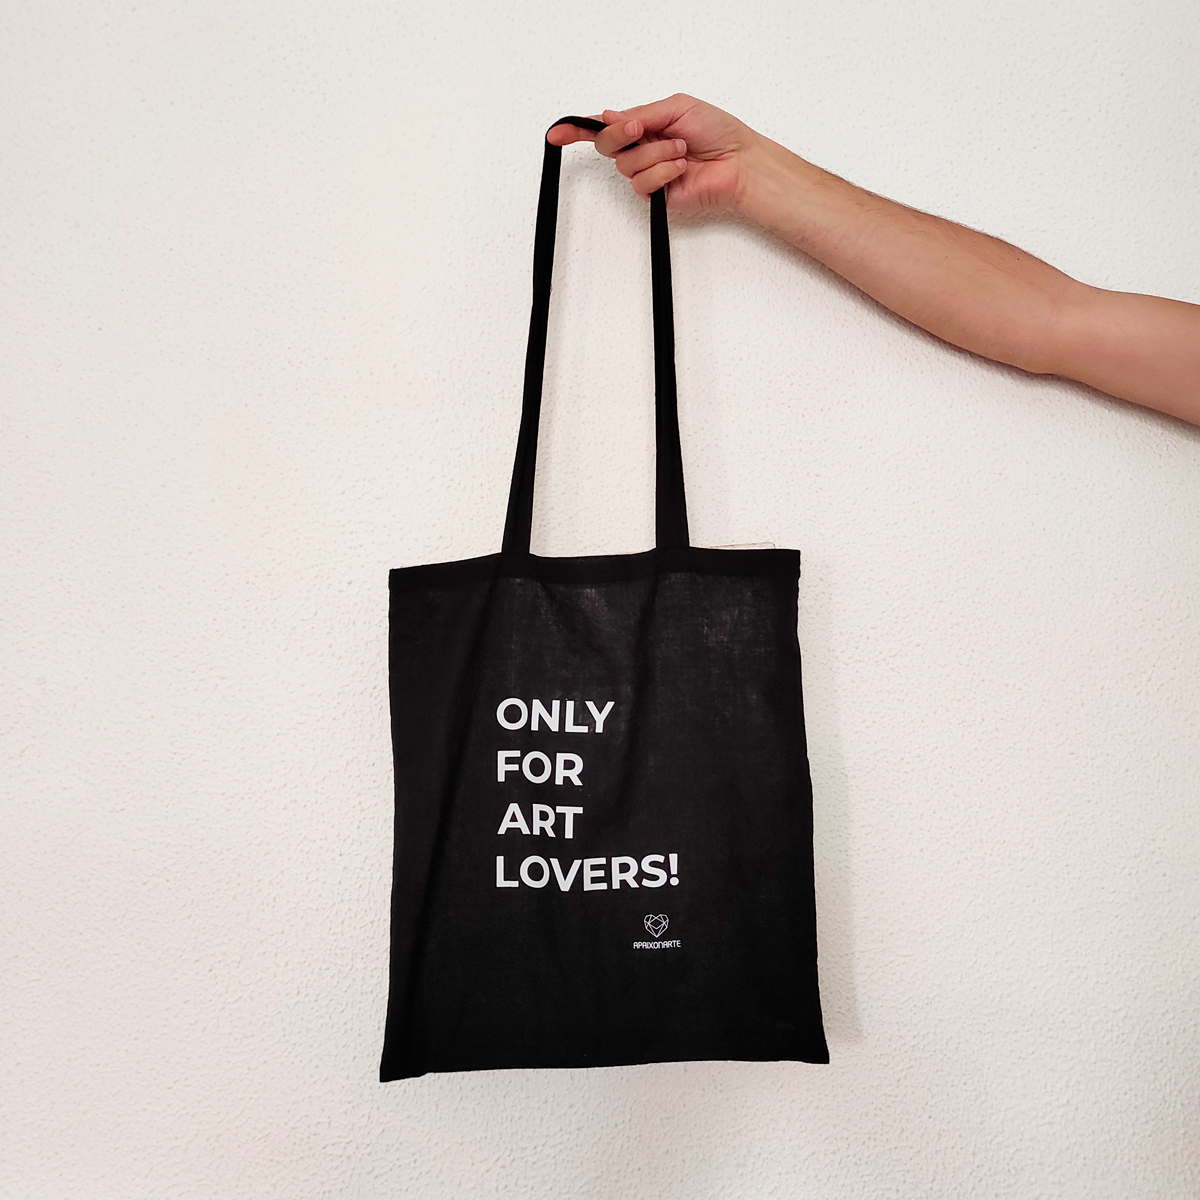 only for art lovers written in a black tote bag by Apaixonarte 